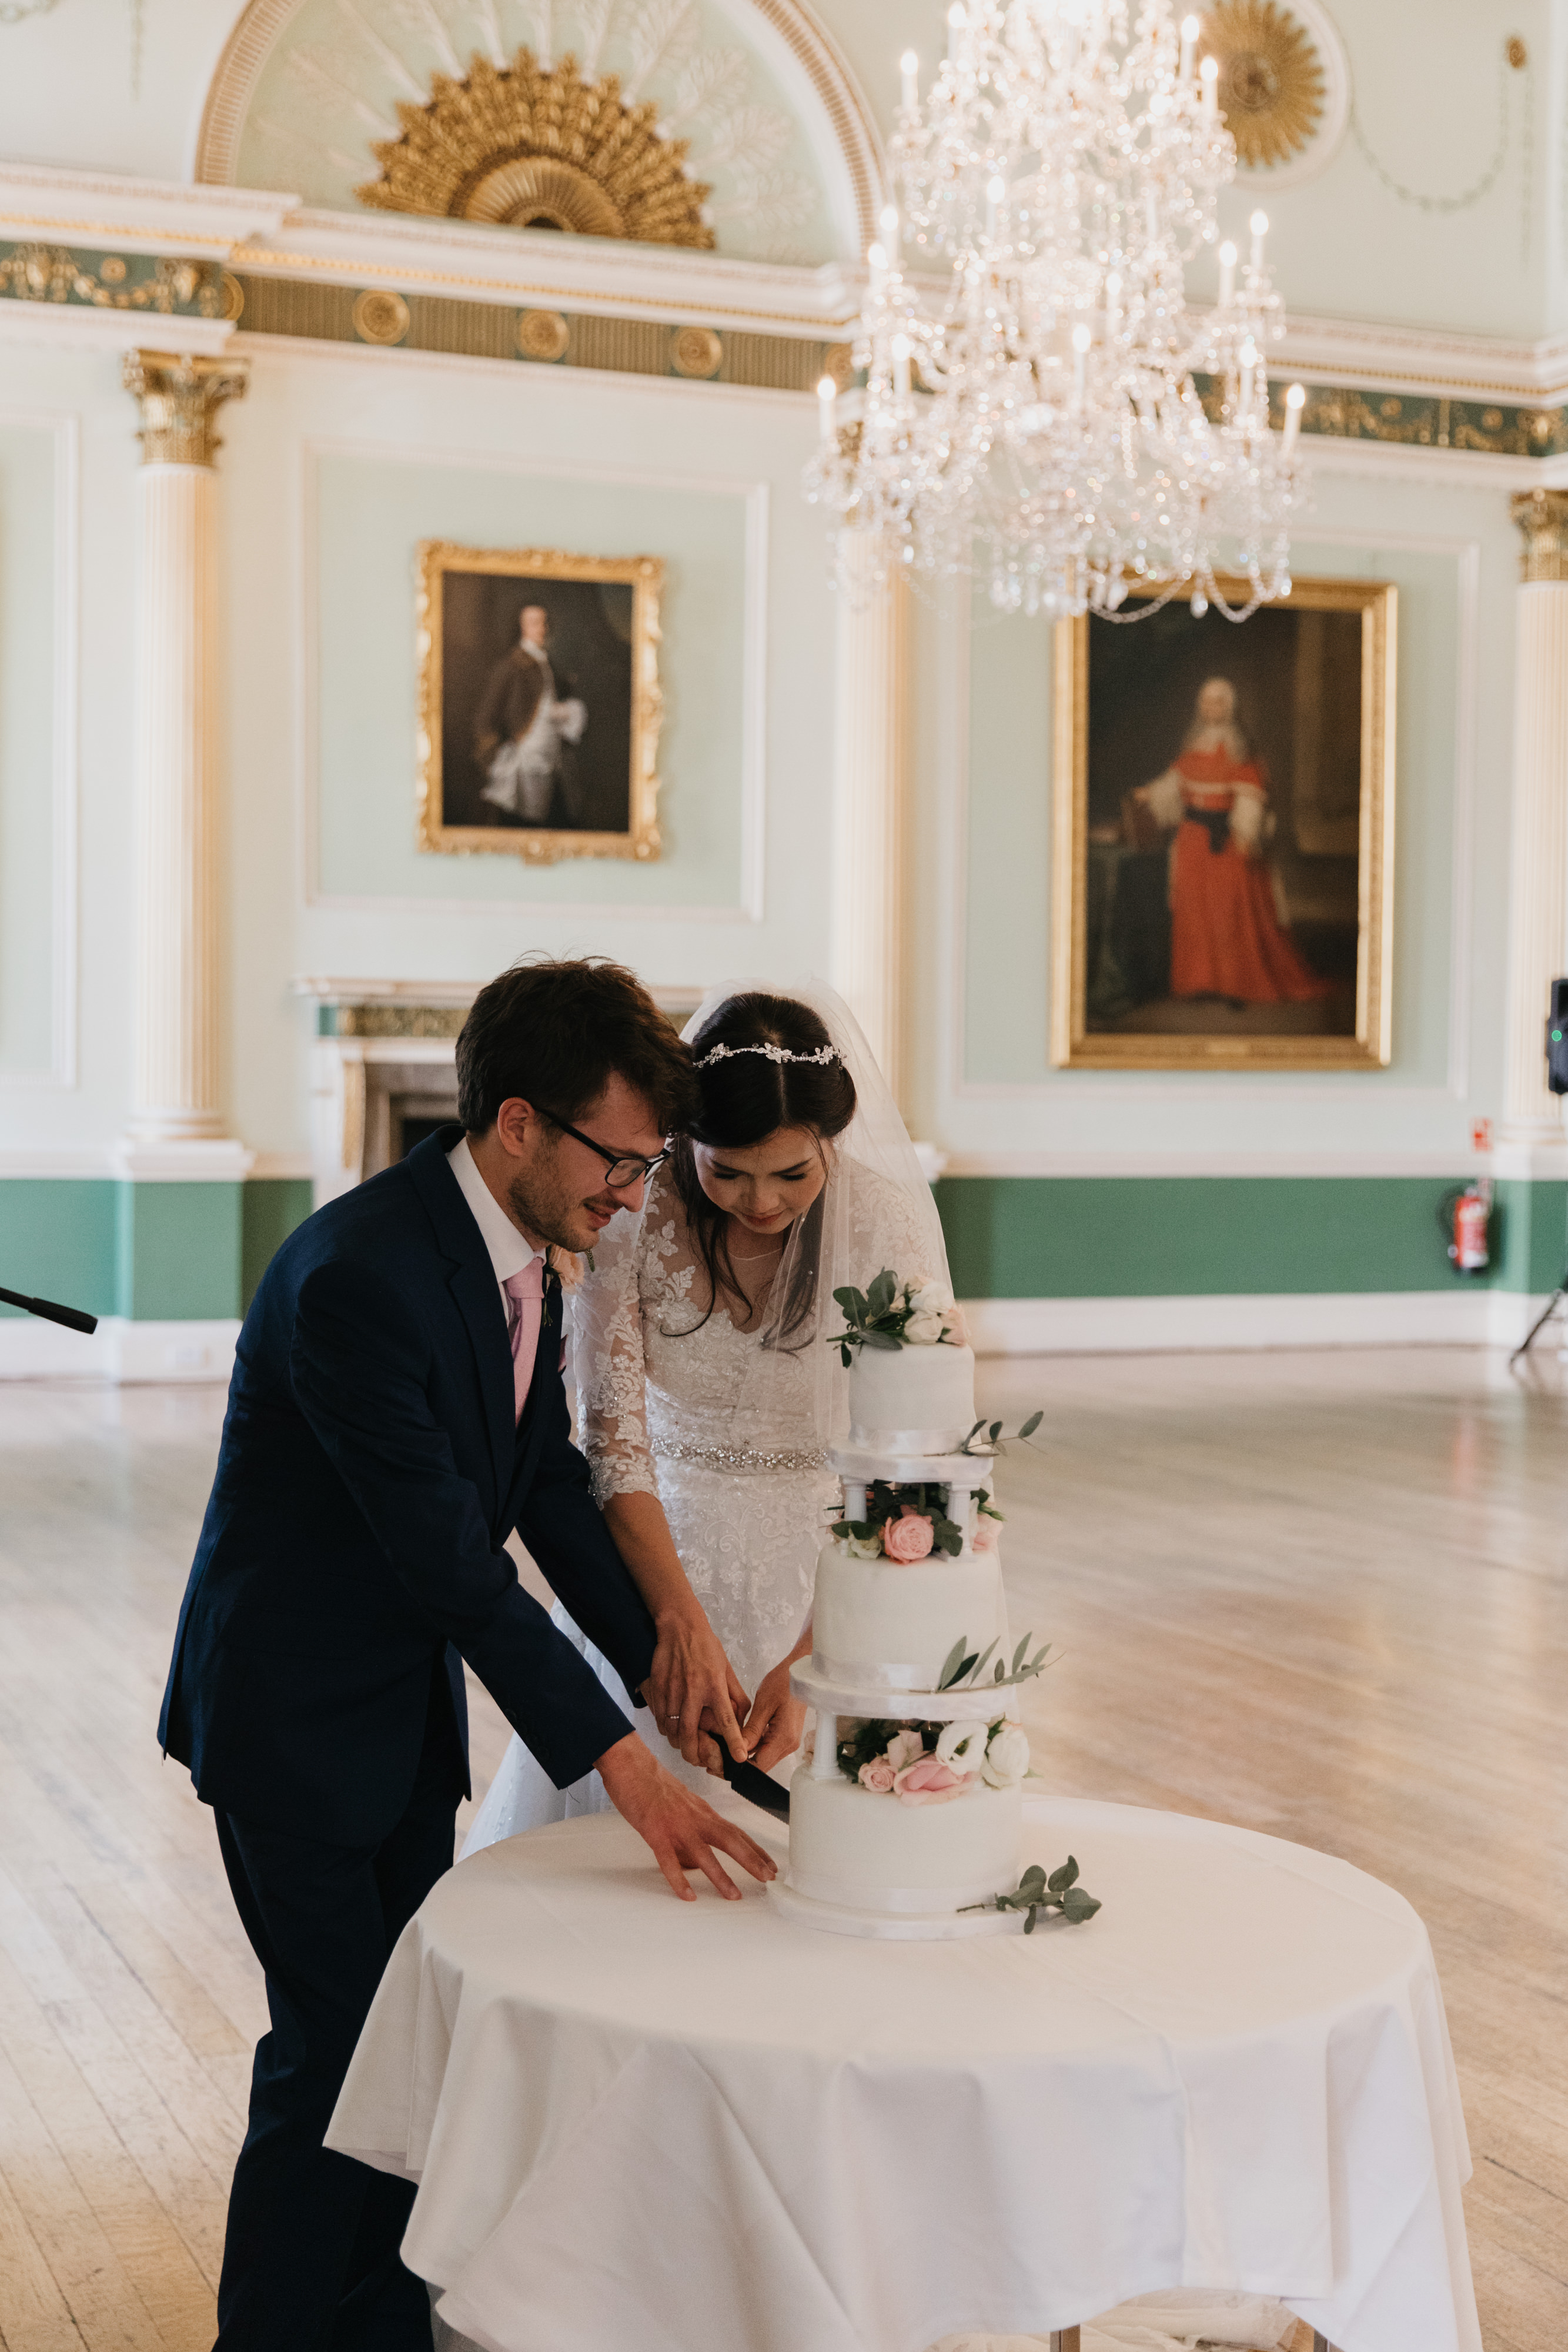 Wedding couple cut their cake in the Banqueting Room